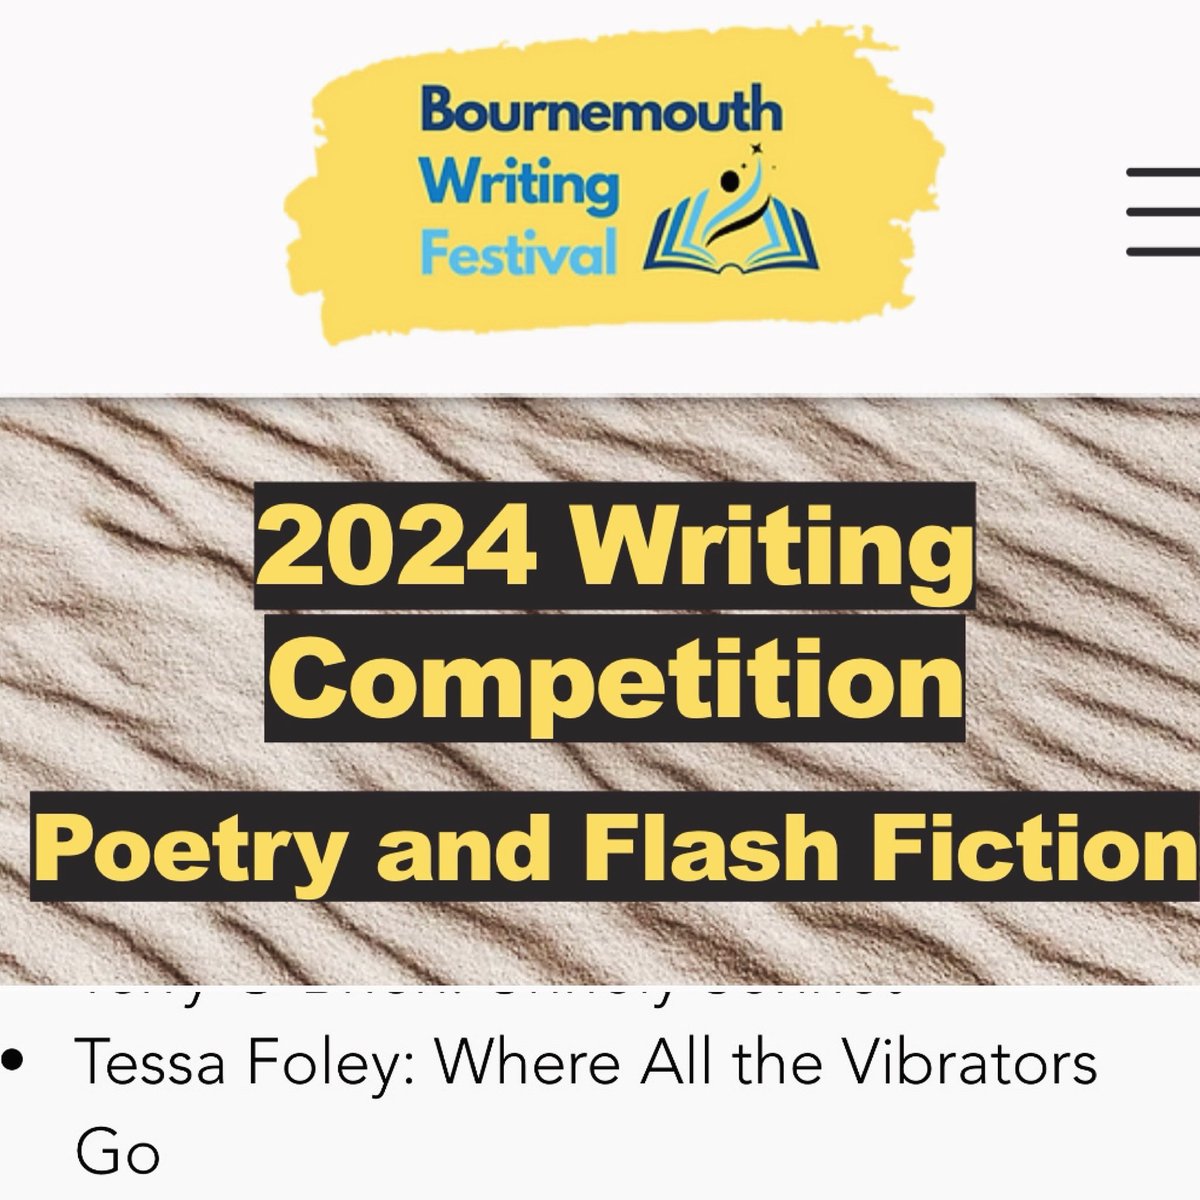 Great news that my poem about sex toys has been longlisted by @BmthWritingFest @DitheringChaps

I’m buzzing 

#poetry #poetrycompetition